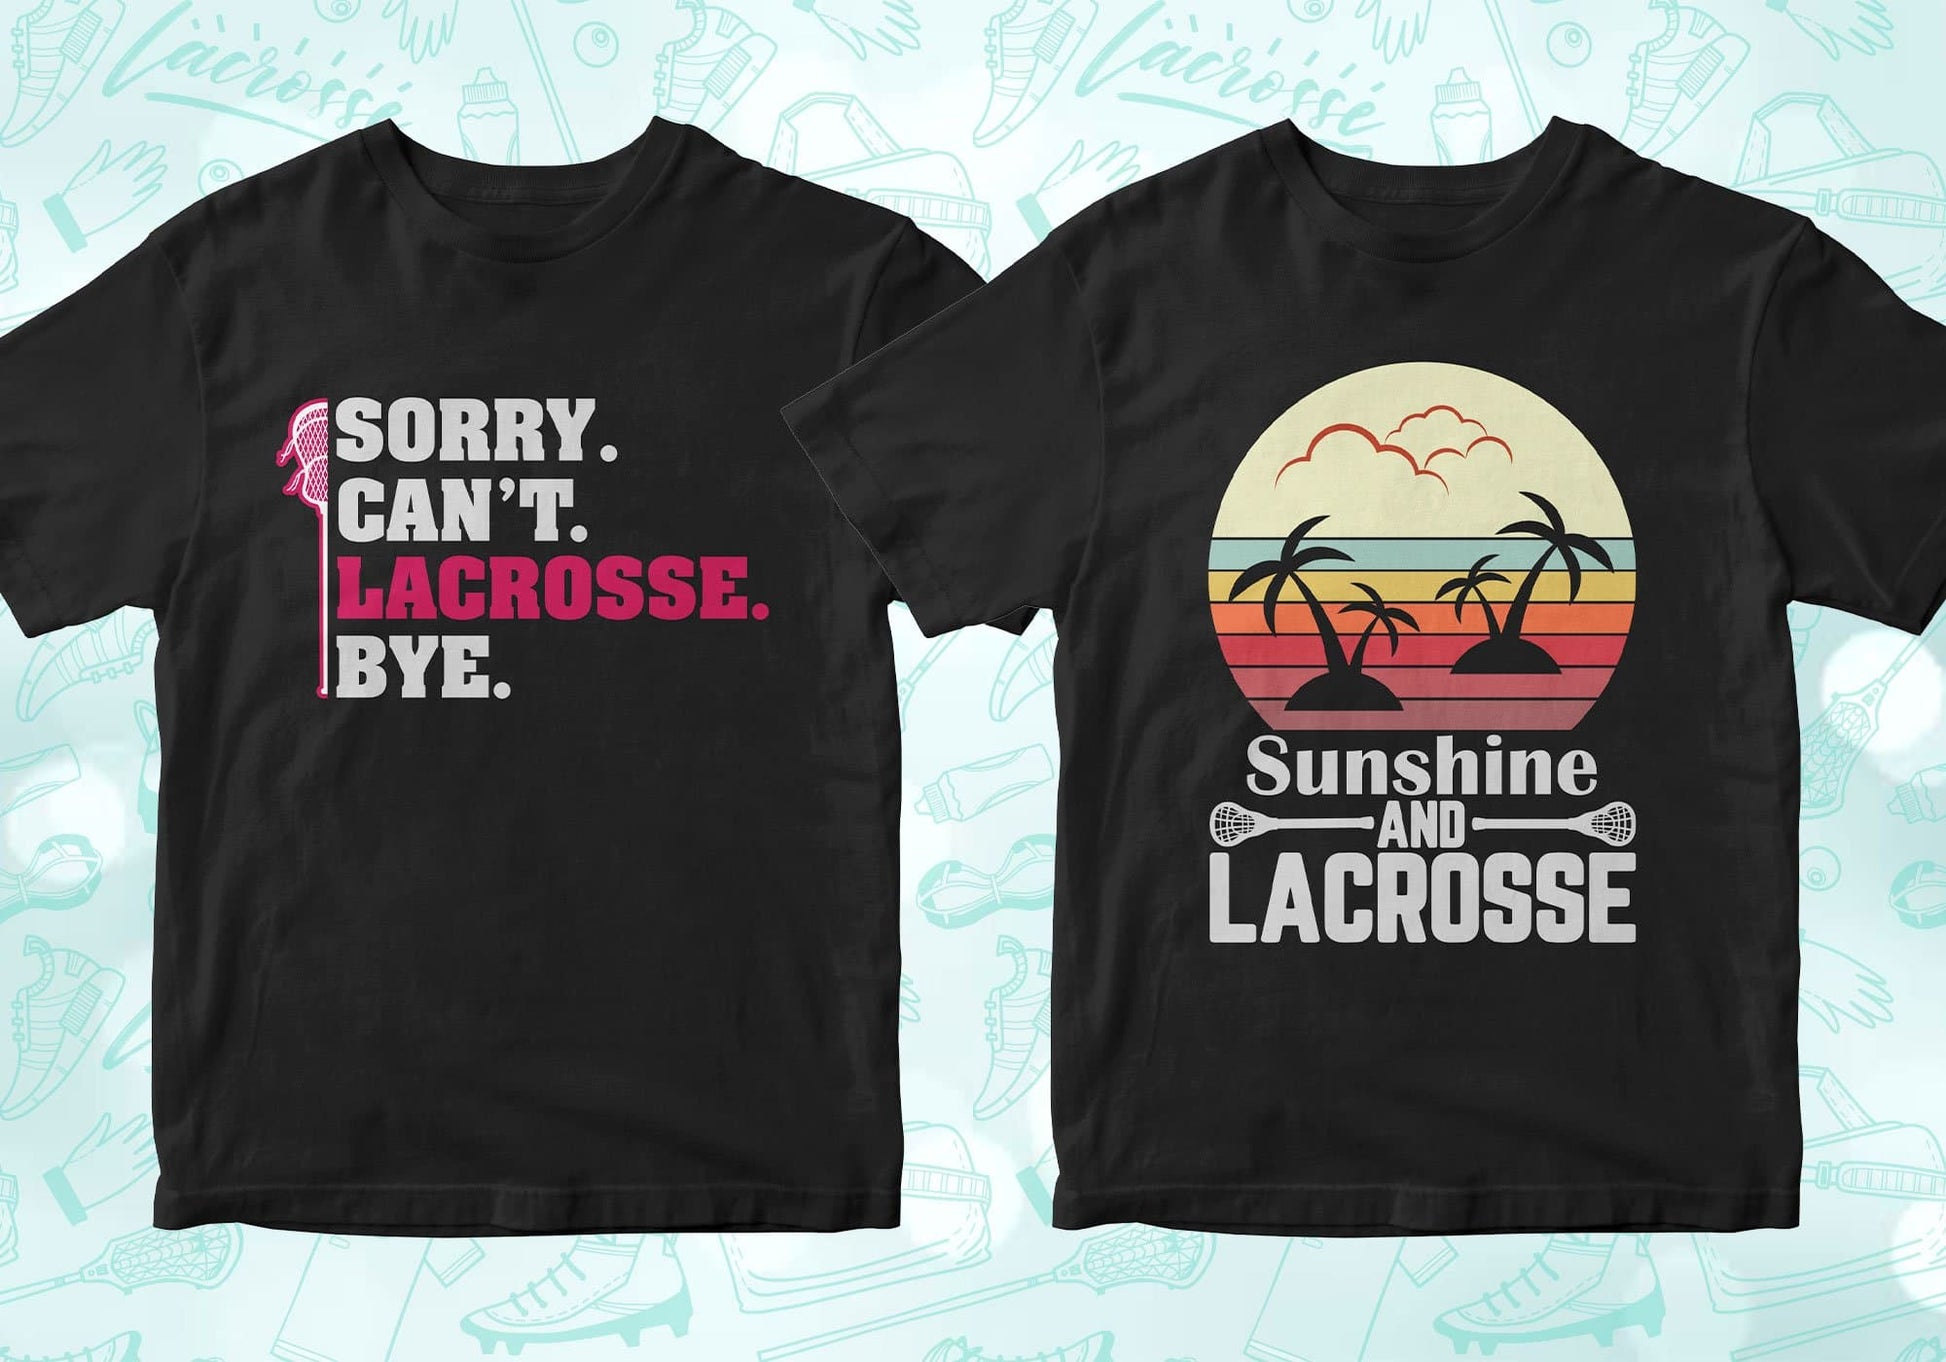 sorry can't lacrosse bye, sunshine and lacrosse, lacrosse shirts lacrosse tshirt lacrosse t shirts lacrosse shirt designs lacrosse graphic